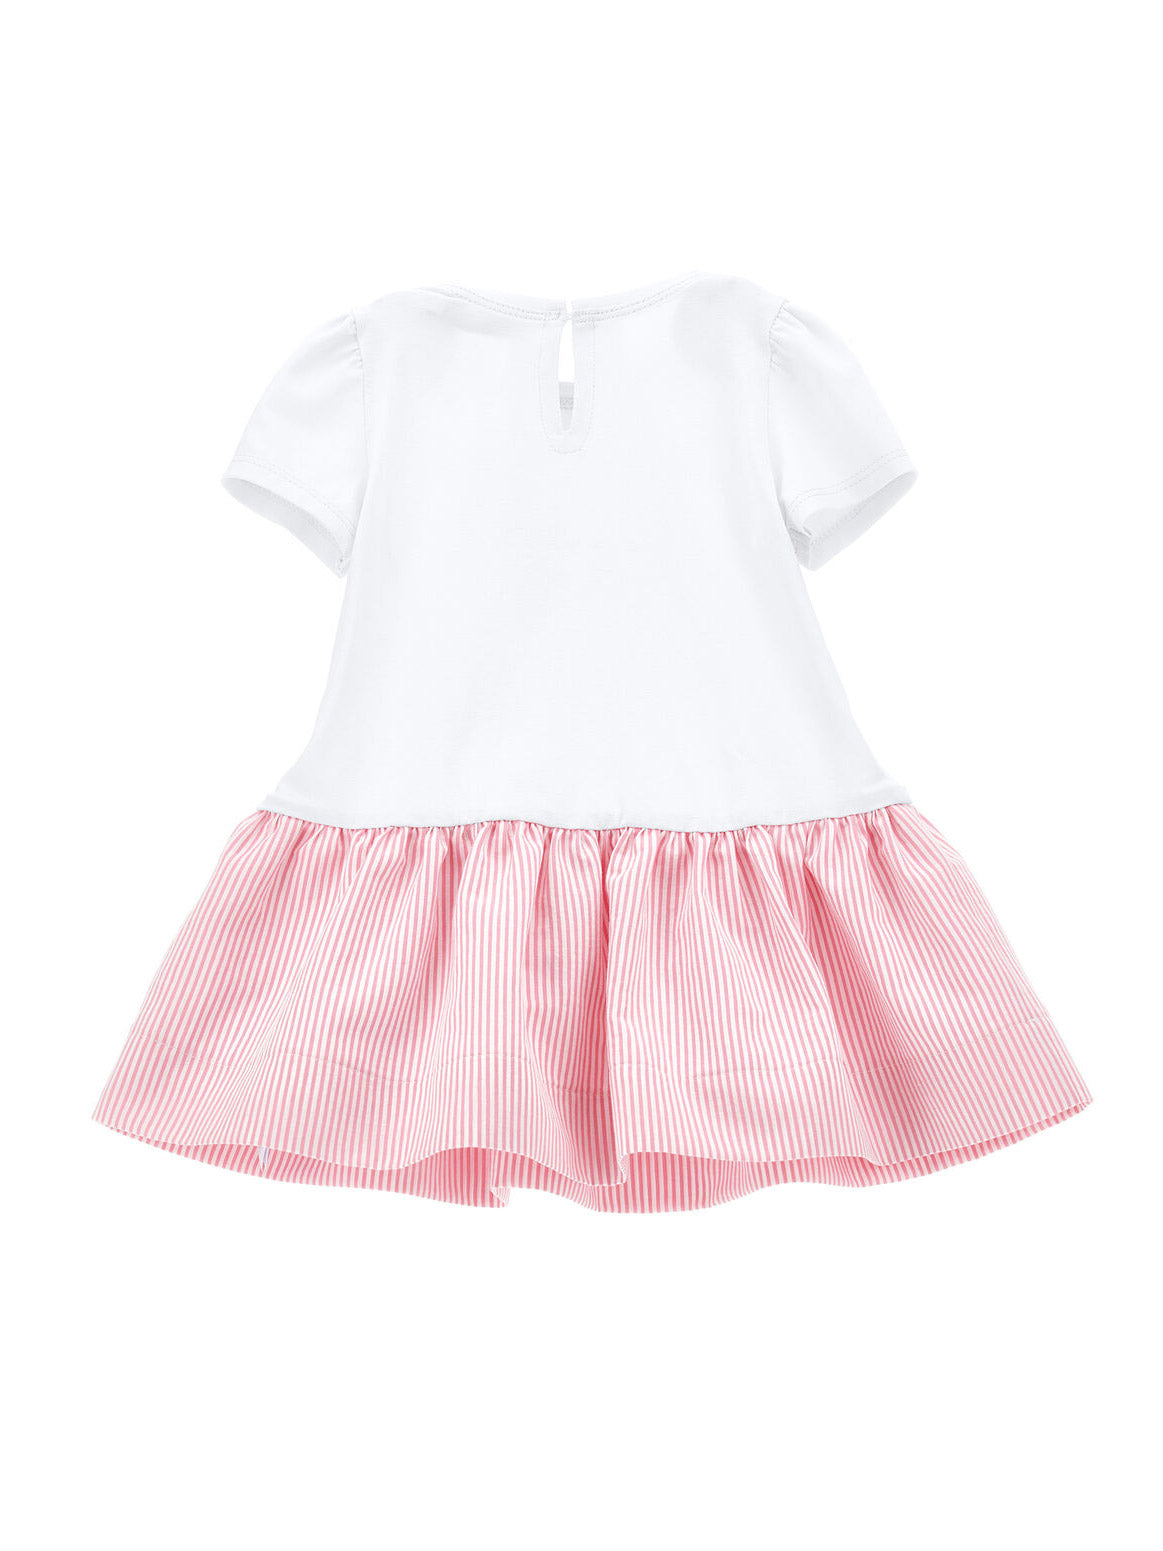 Organic cotton dress for baby